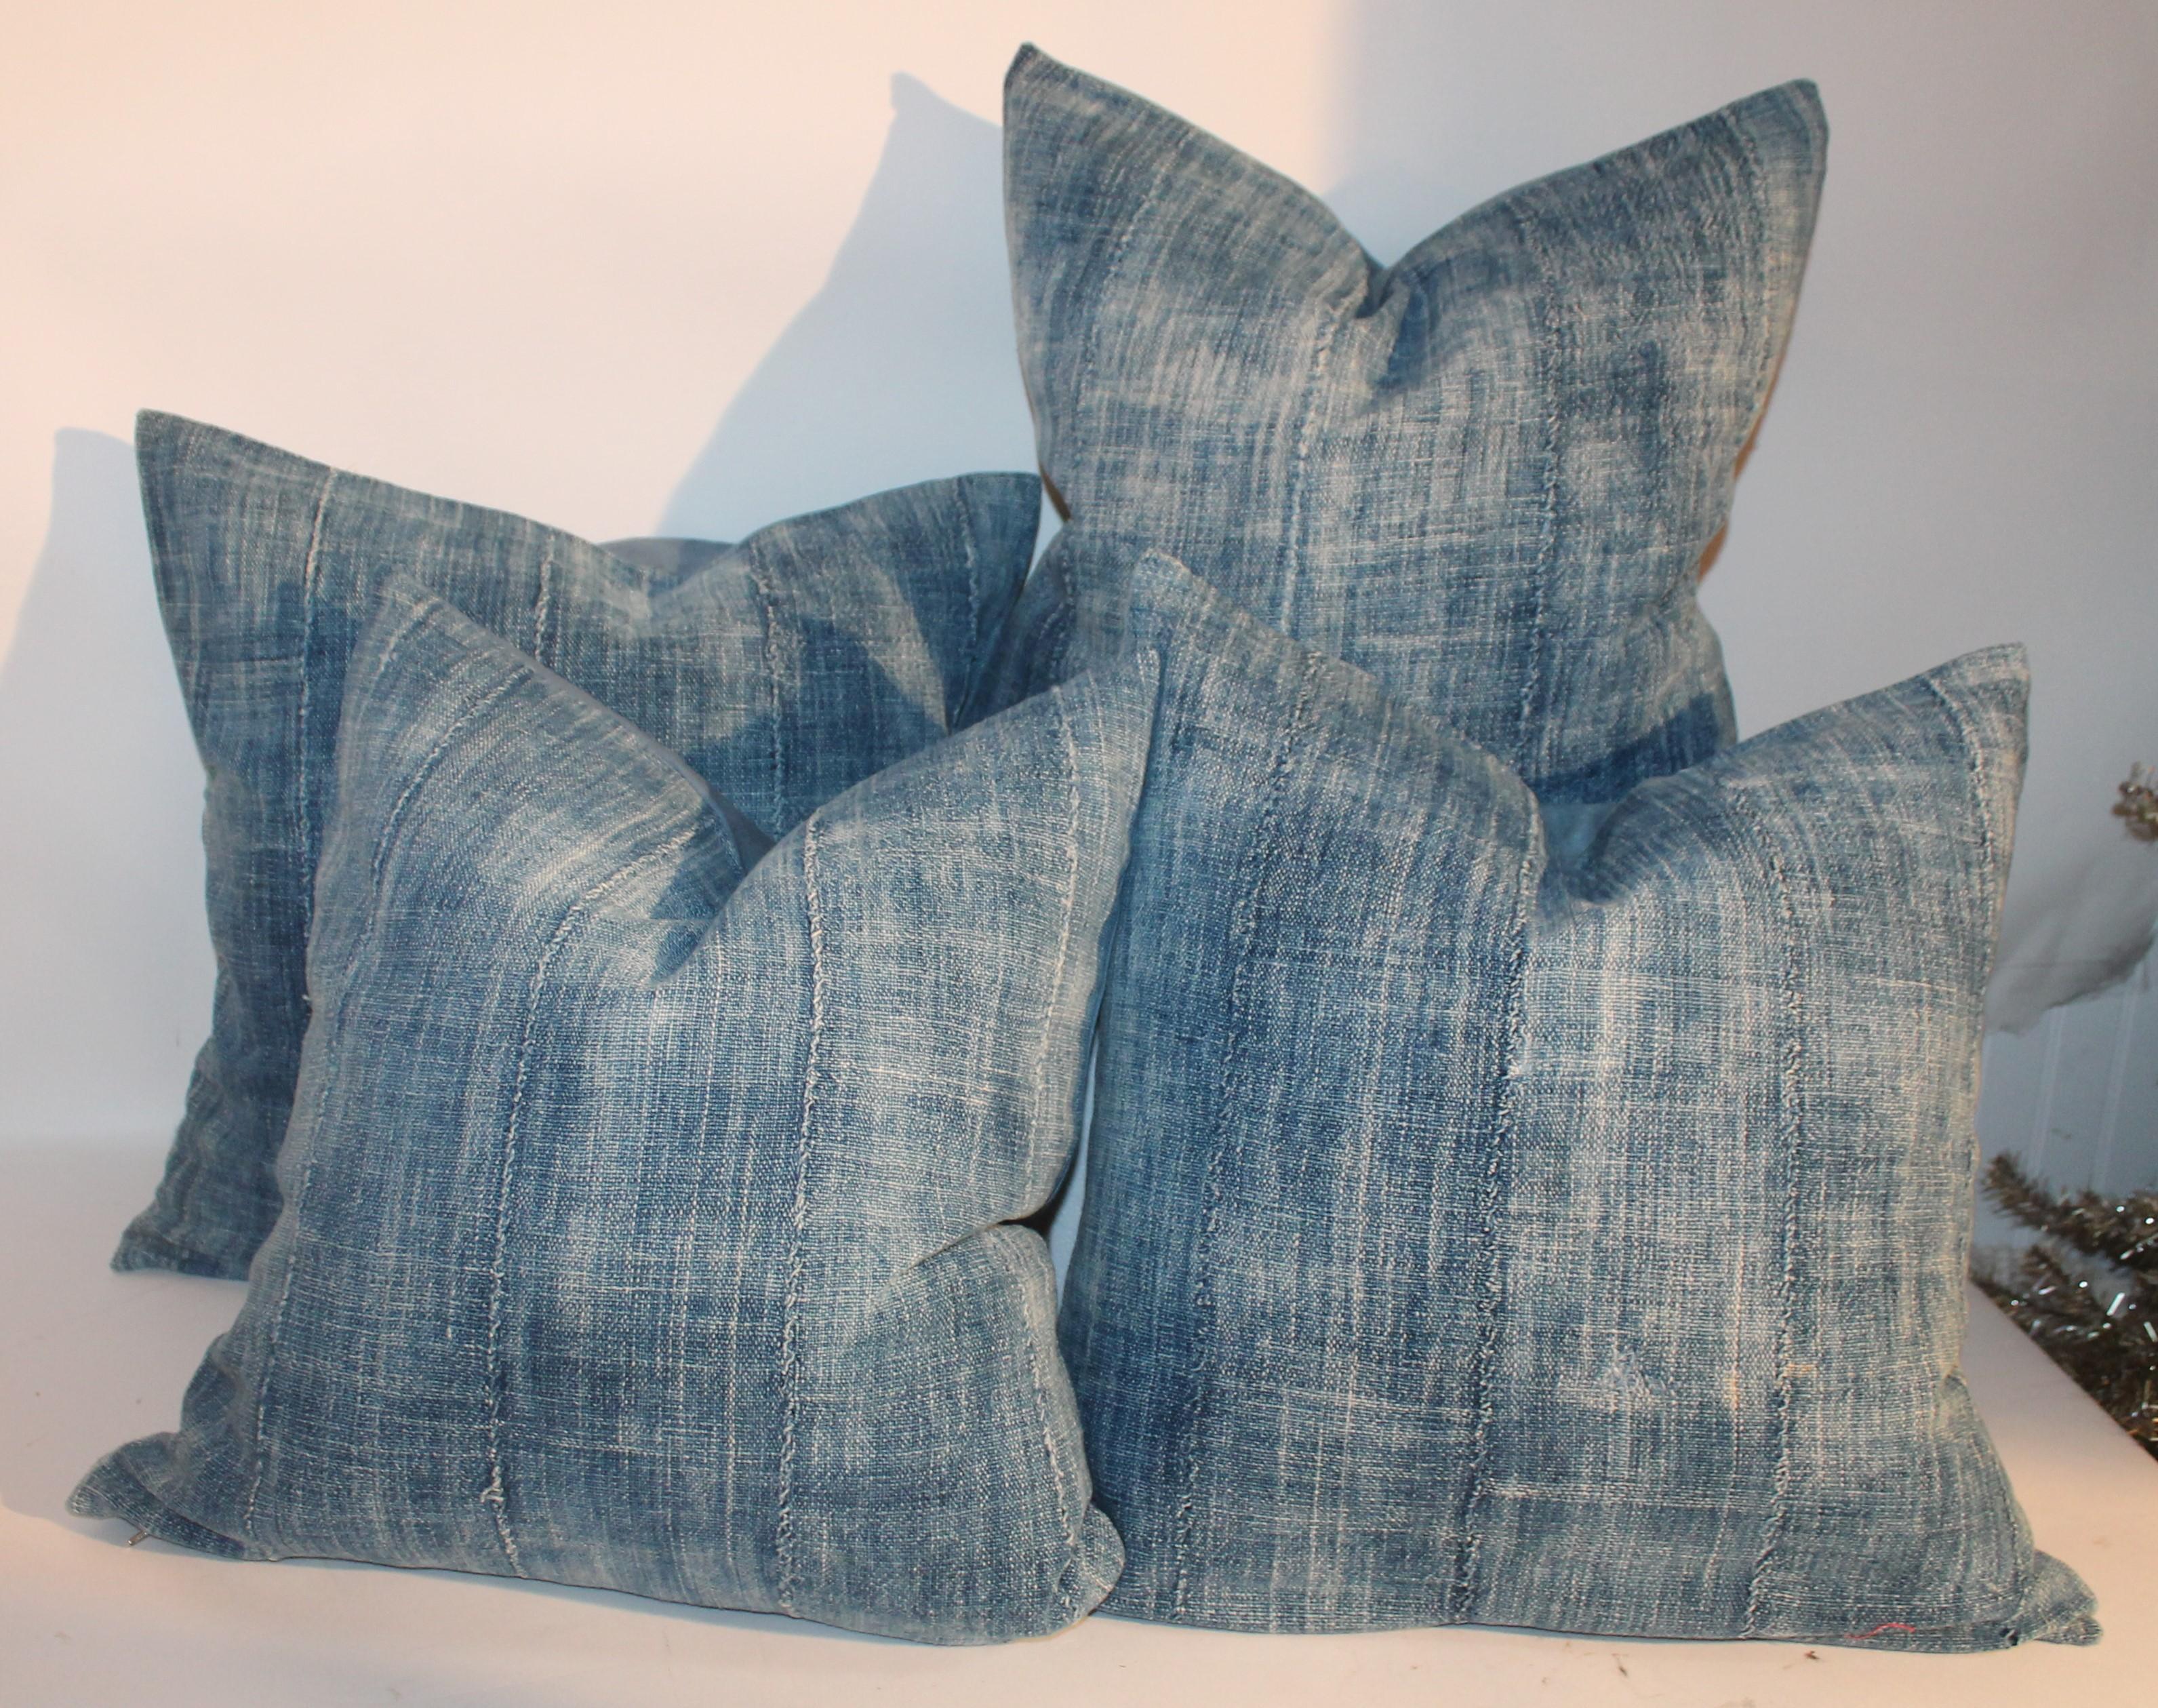 These fine blue pieced homespun linen pillows have robin egg blue linen backings and in great condition. The blue is slightly off or different then one another from age and use. Sold as a collection of four pillows. One pair can be sold for 895.